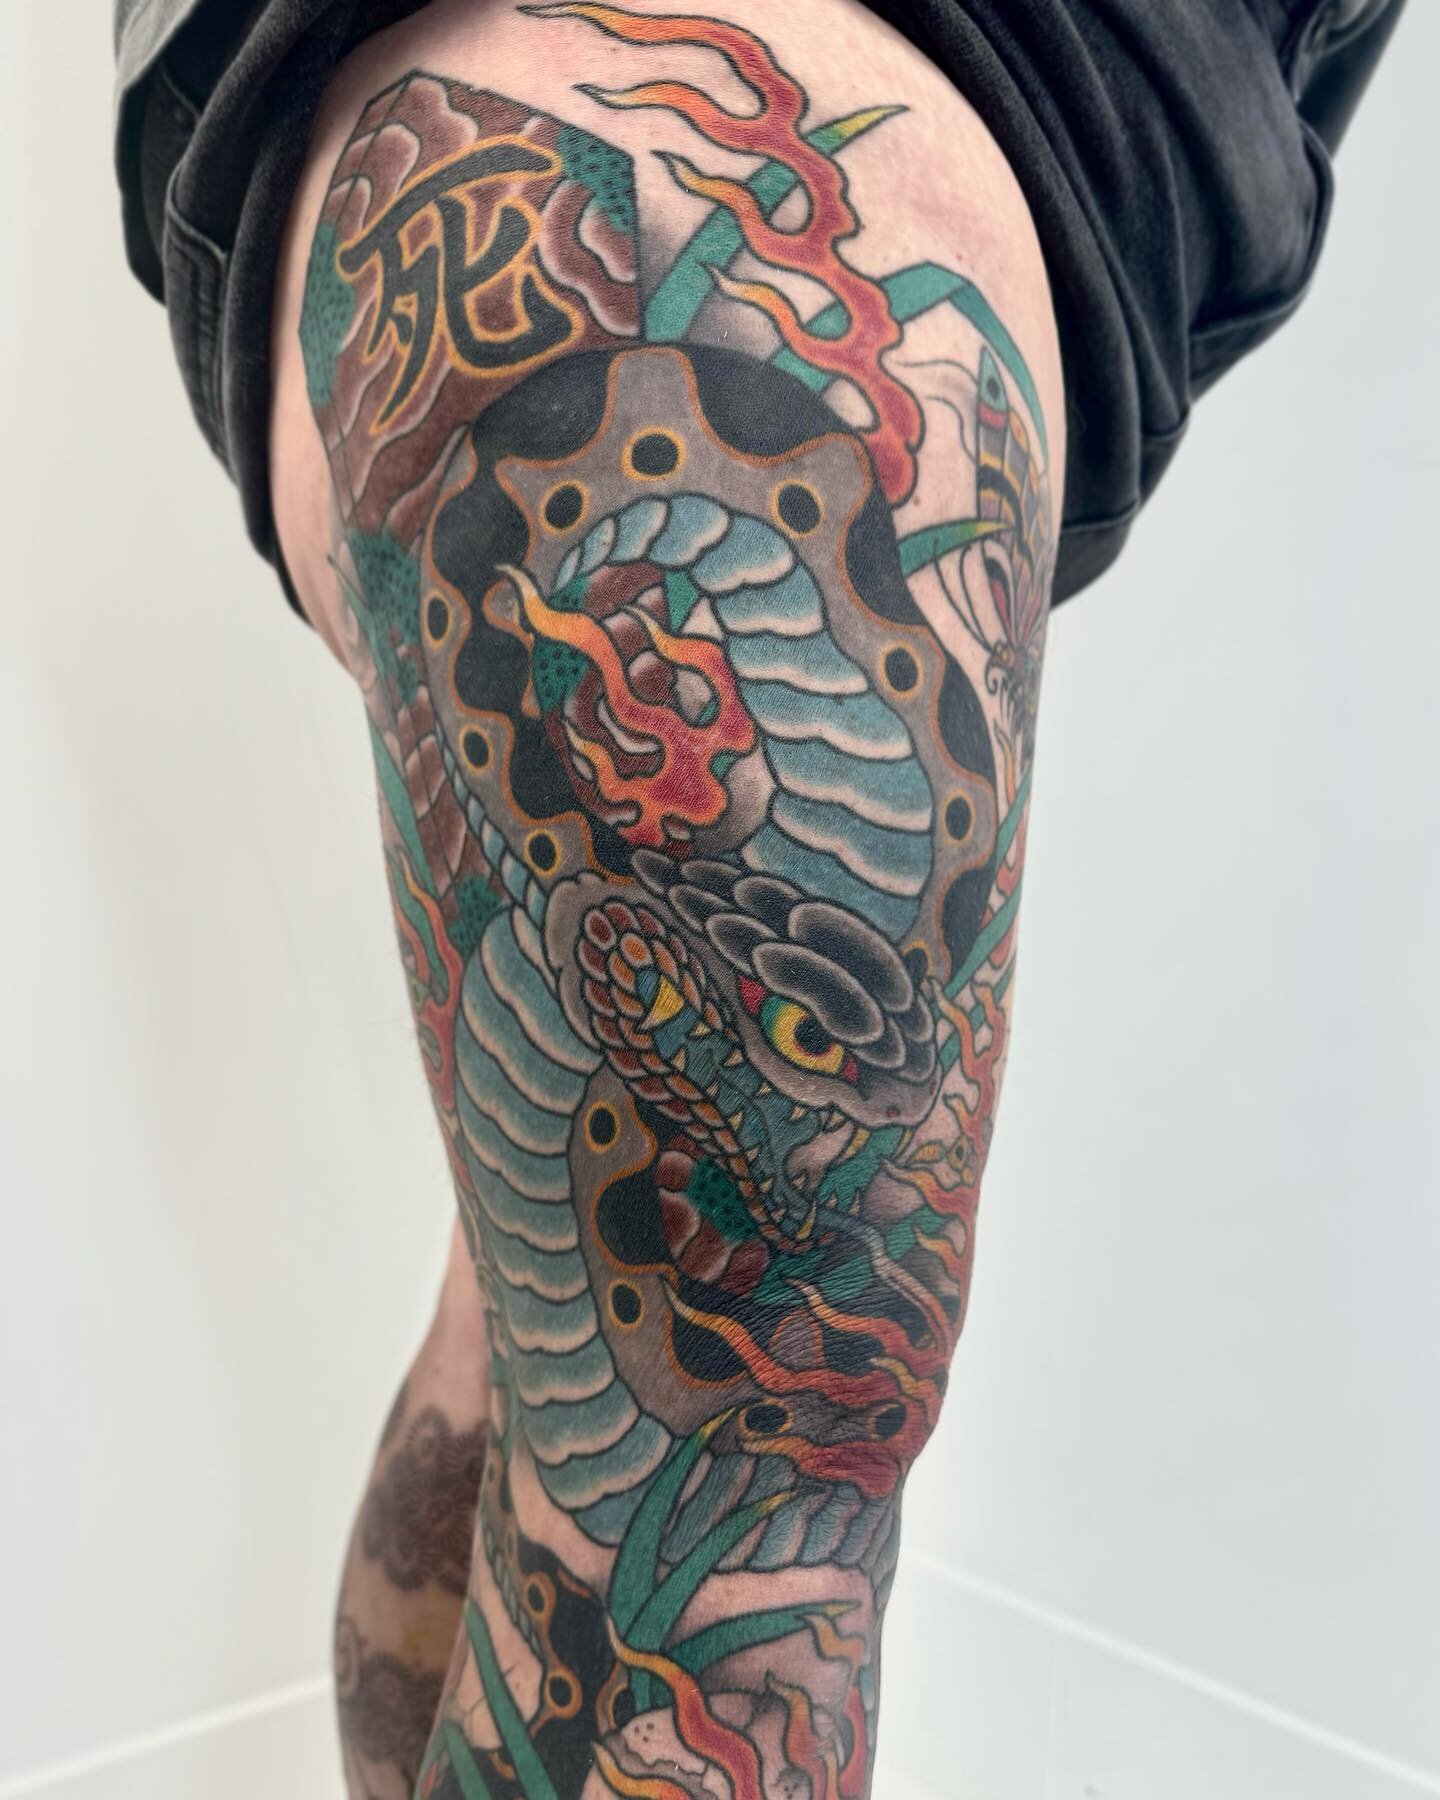 Recently finished leg sleeve. Amanda asked for a big snake, I got a little carried away with the design and luckily she was into it, Thank you Amanda!